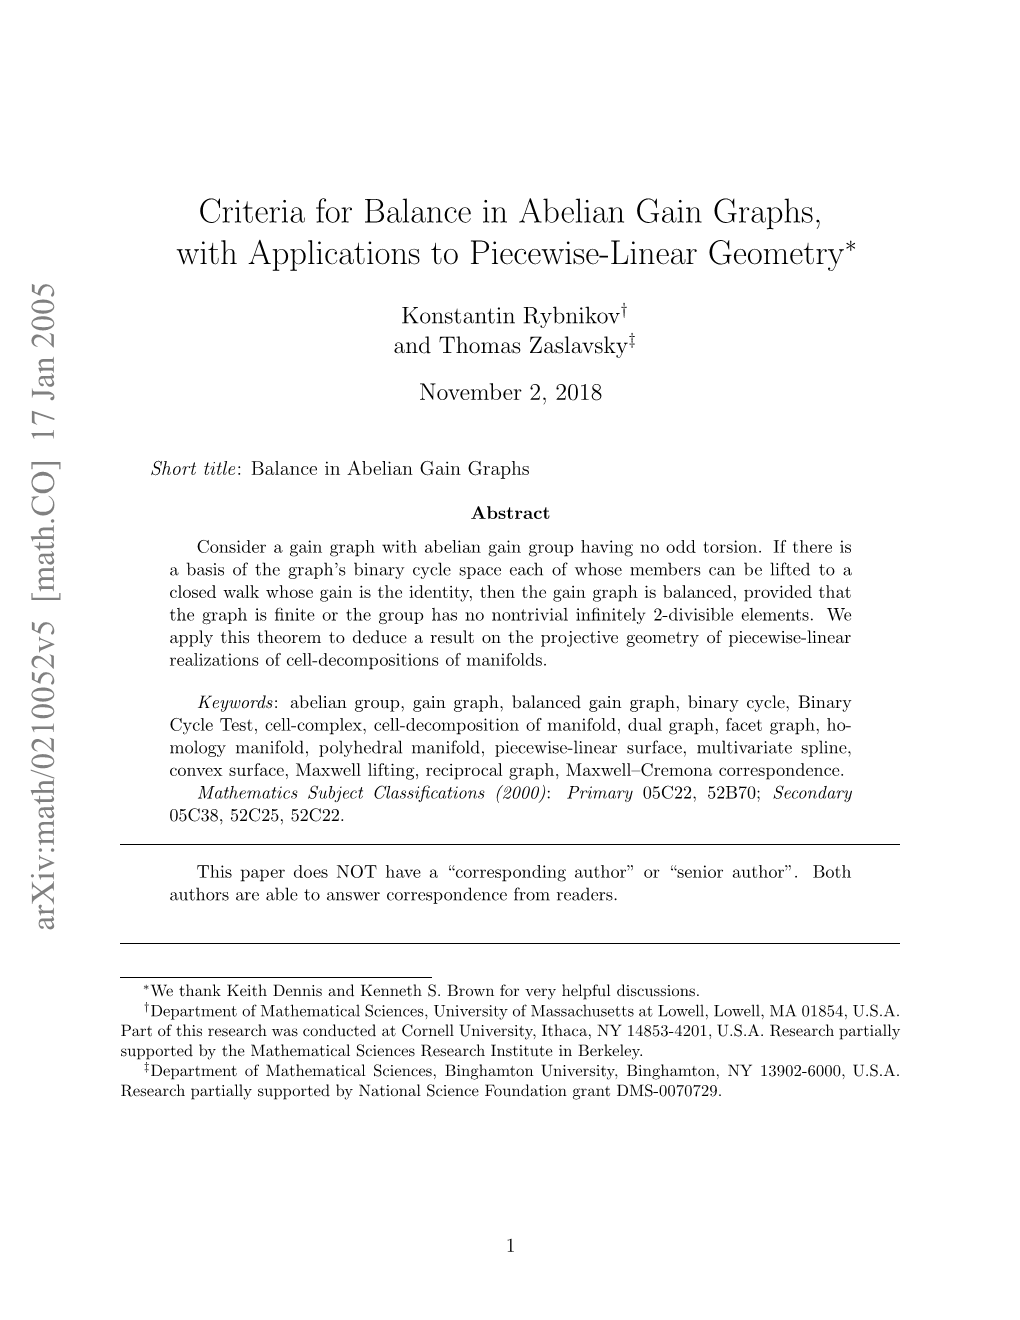 Criteria for Balance in Abelian Gain Graphs, with Applications to Piecewise-Linear Geometry